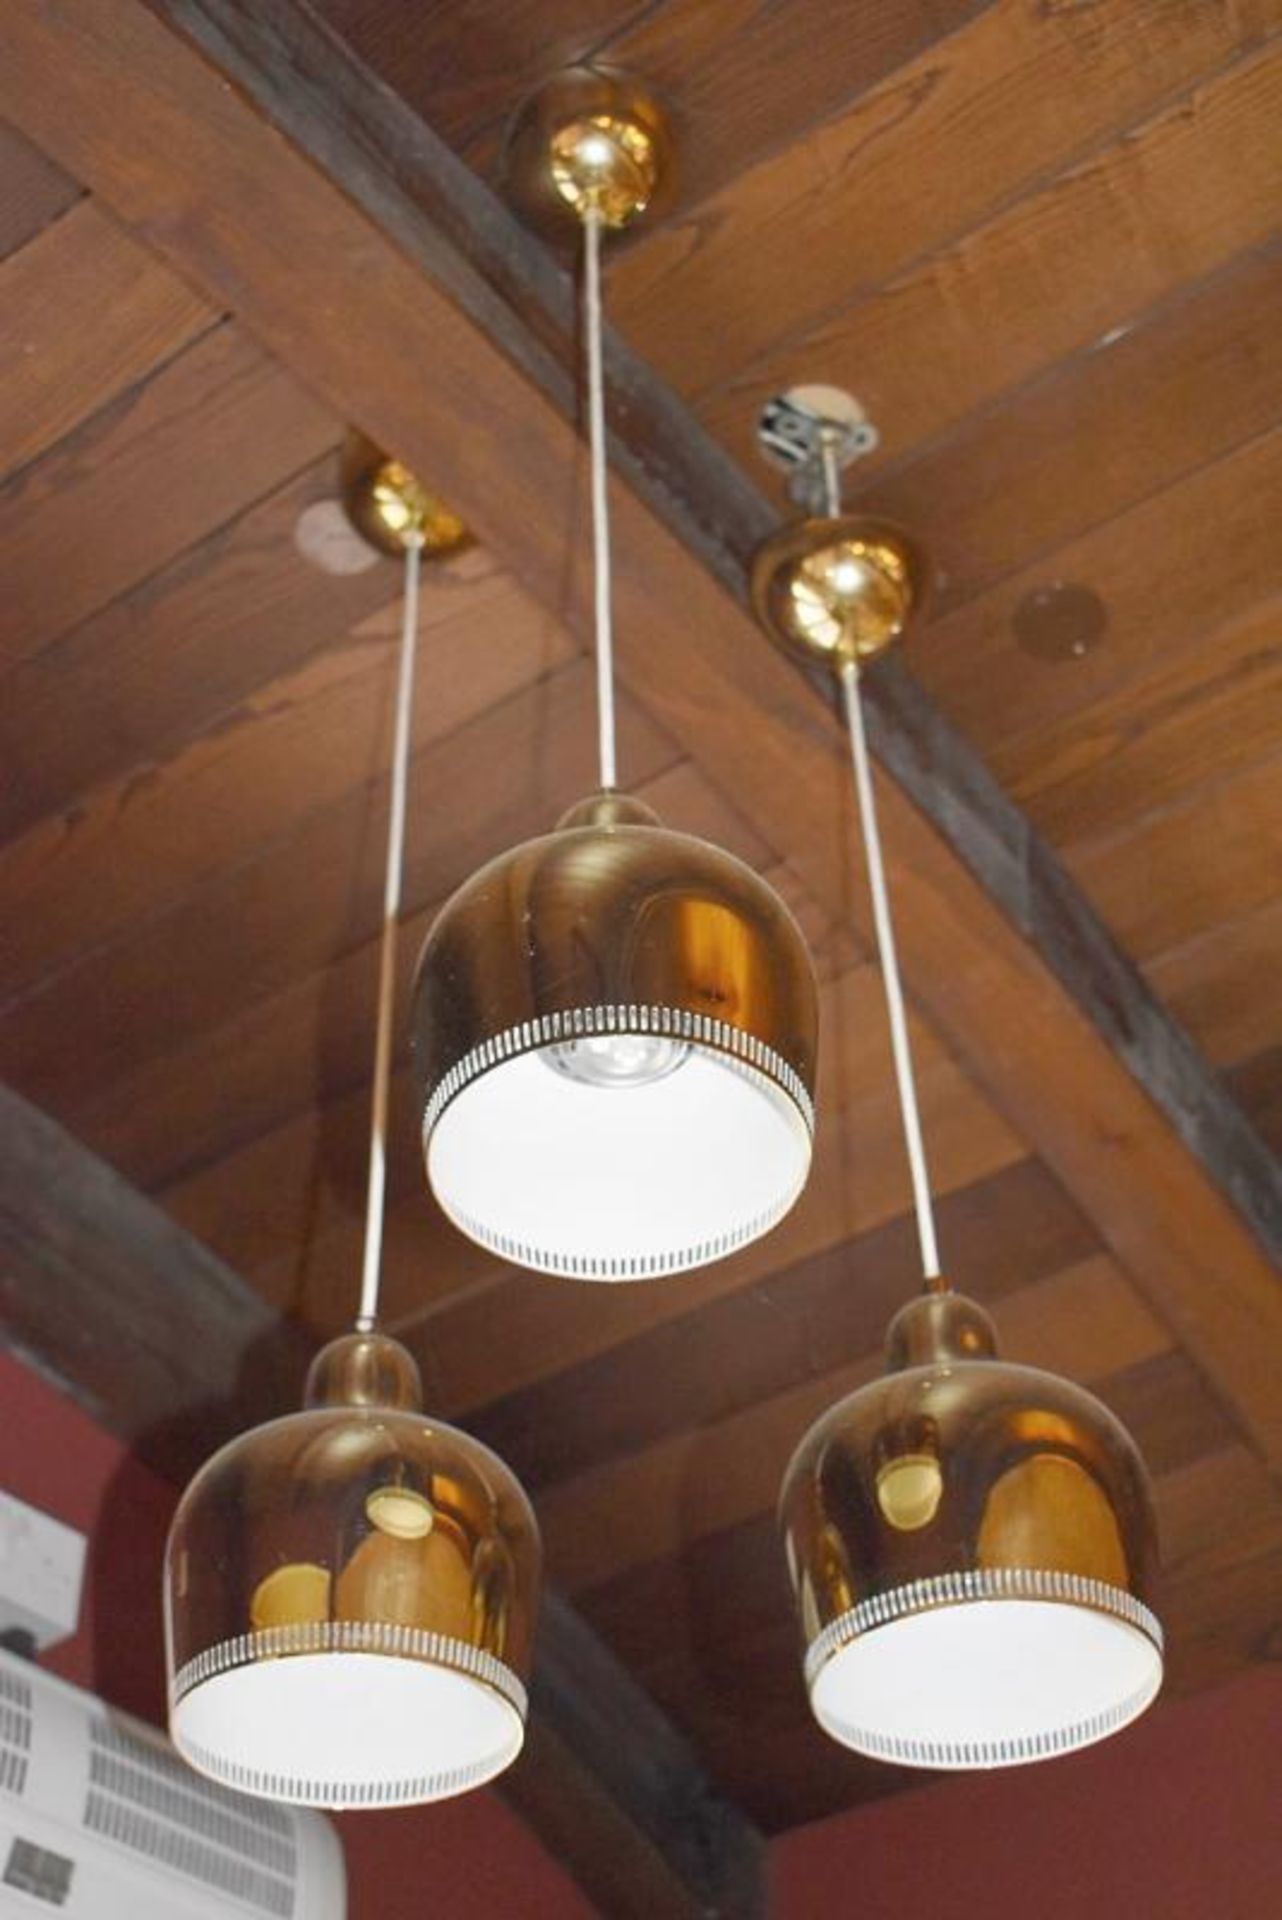 1 x Set of Three Ceiling Lights Featuring Brass Pendants and Ceiling Roses - Pendant Diameter 16 - Image 3 of 3